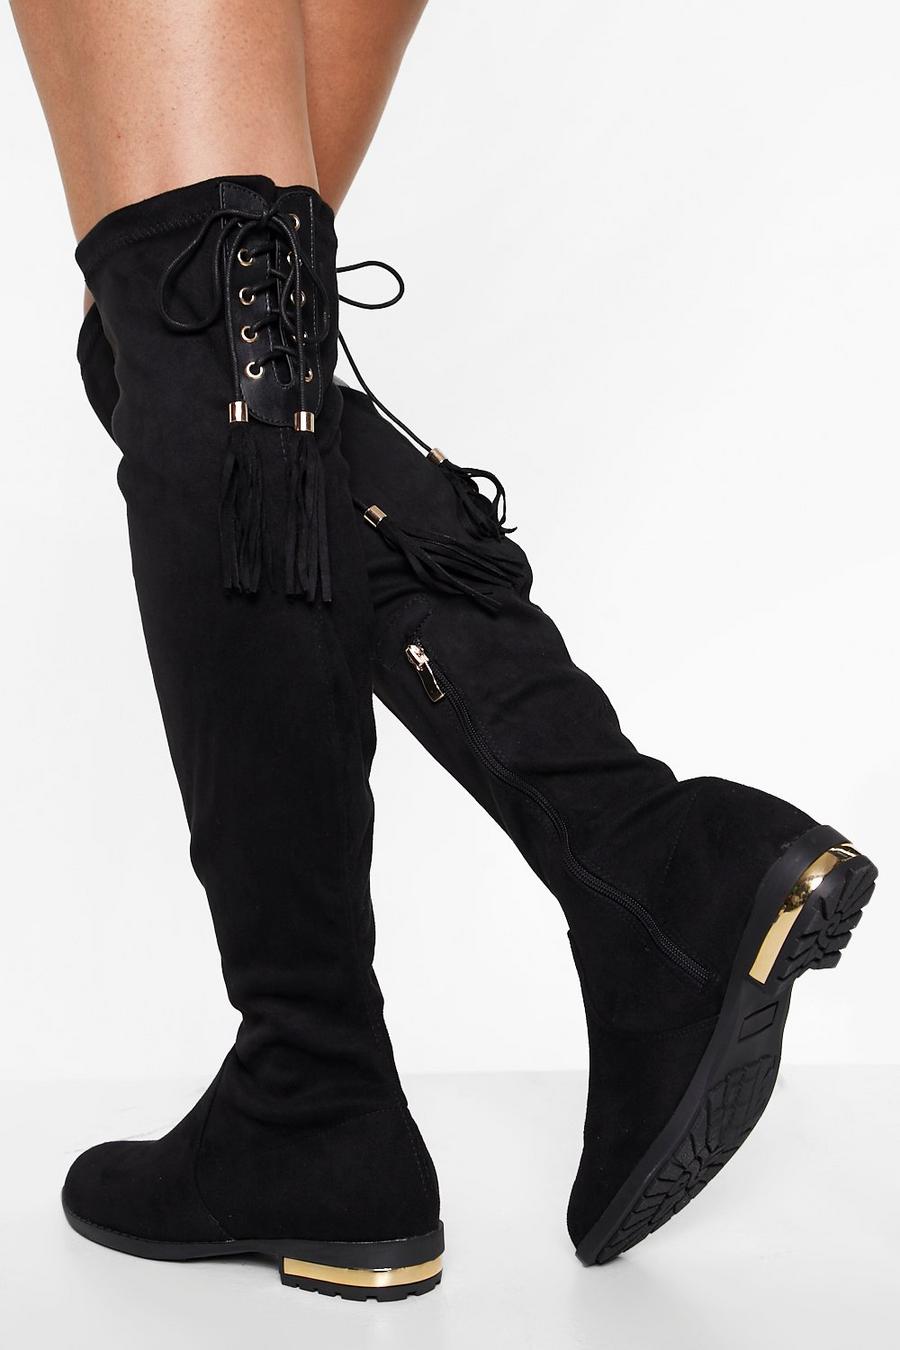 Black Over The Knee Boots Tassel Detail Boots